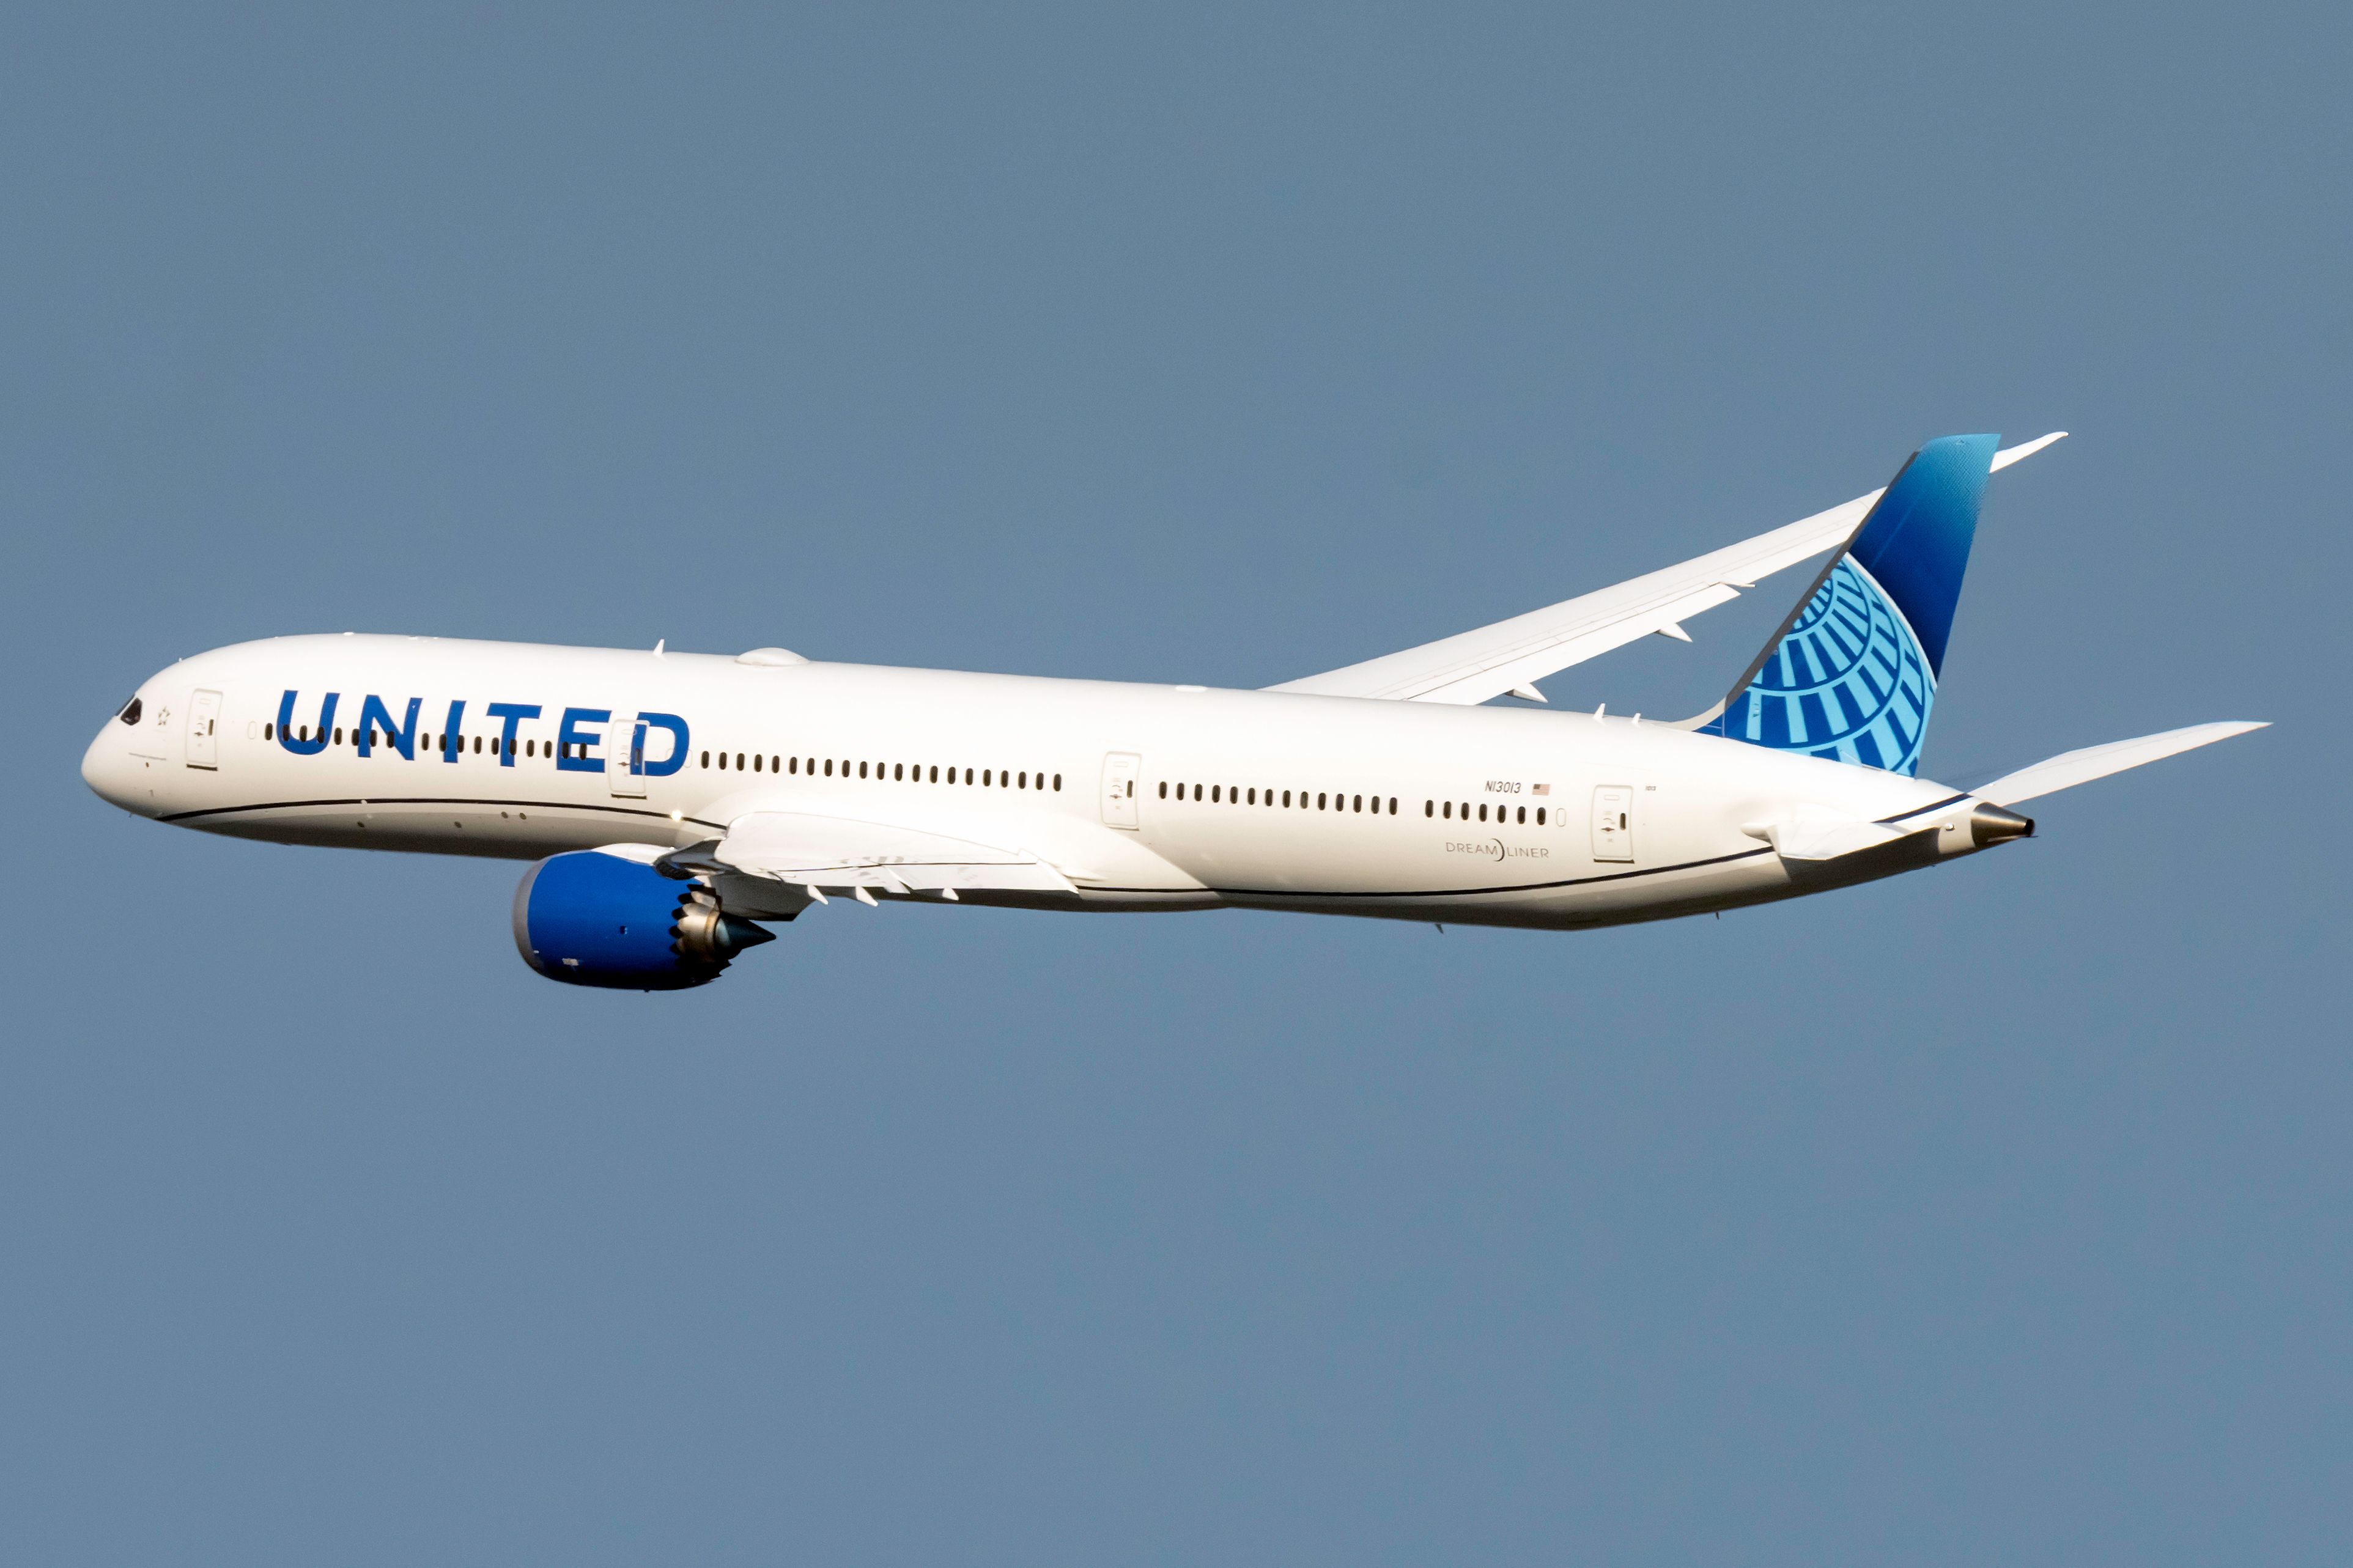 A United Airlines Boeing 787-10 Dreamliner Flying In The Sky.